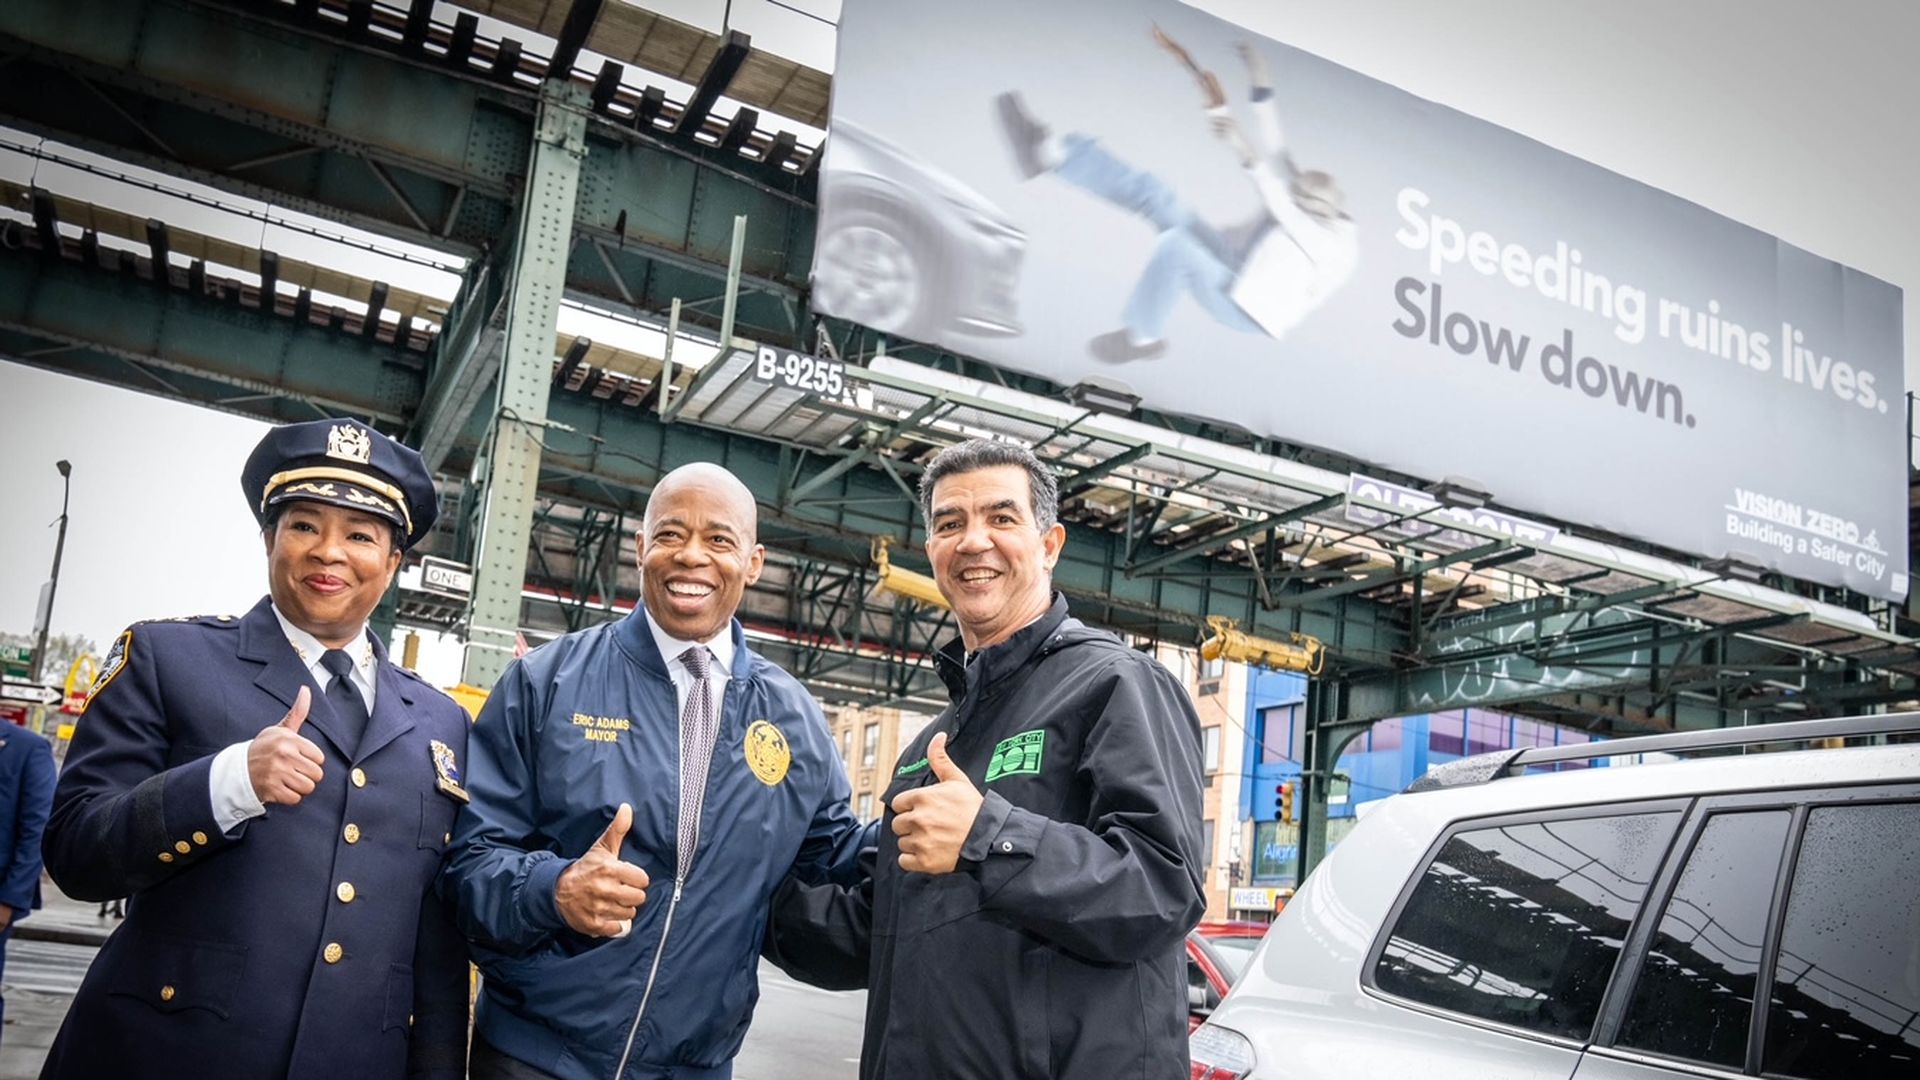 NYC mayor Eric Adams launches a "Speeding ruins lives" campaign